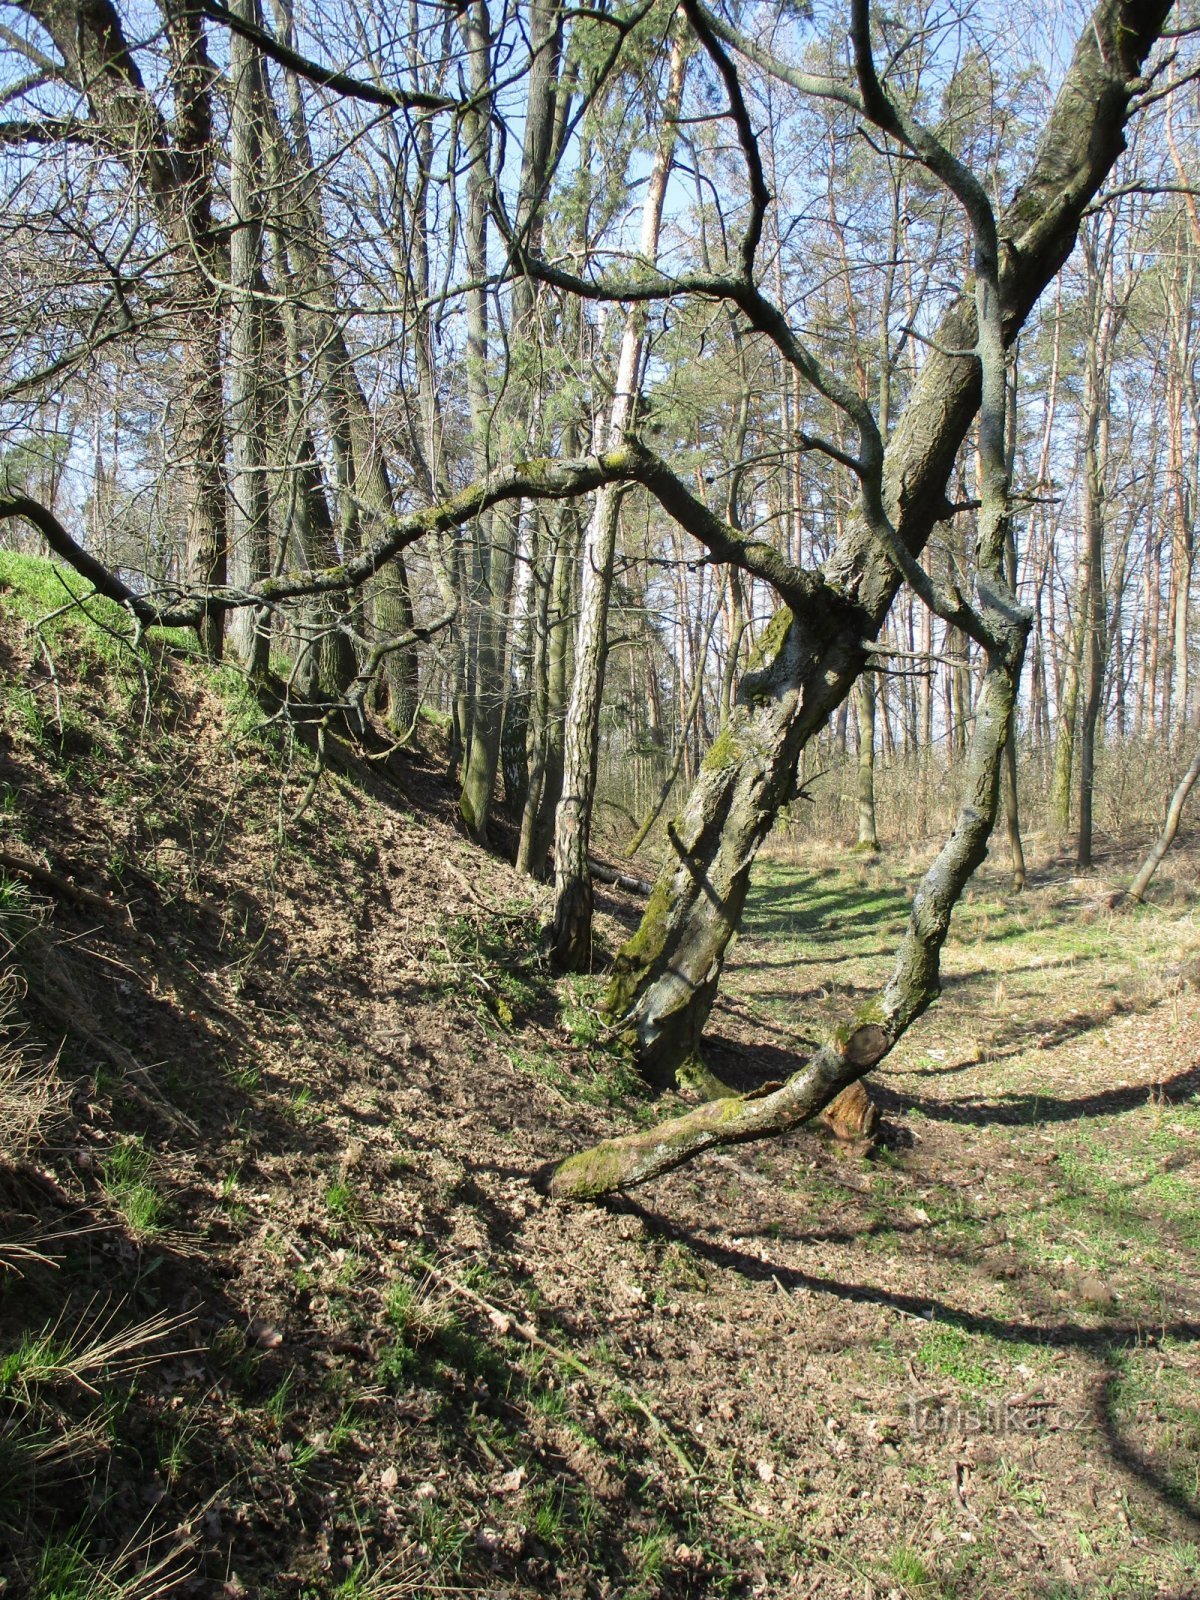 Wooded part of the original orchards (Hořiněves, 2.4.2020 April XNUMX)